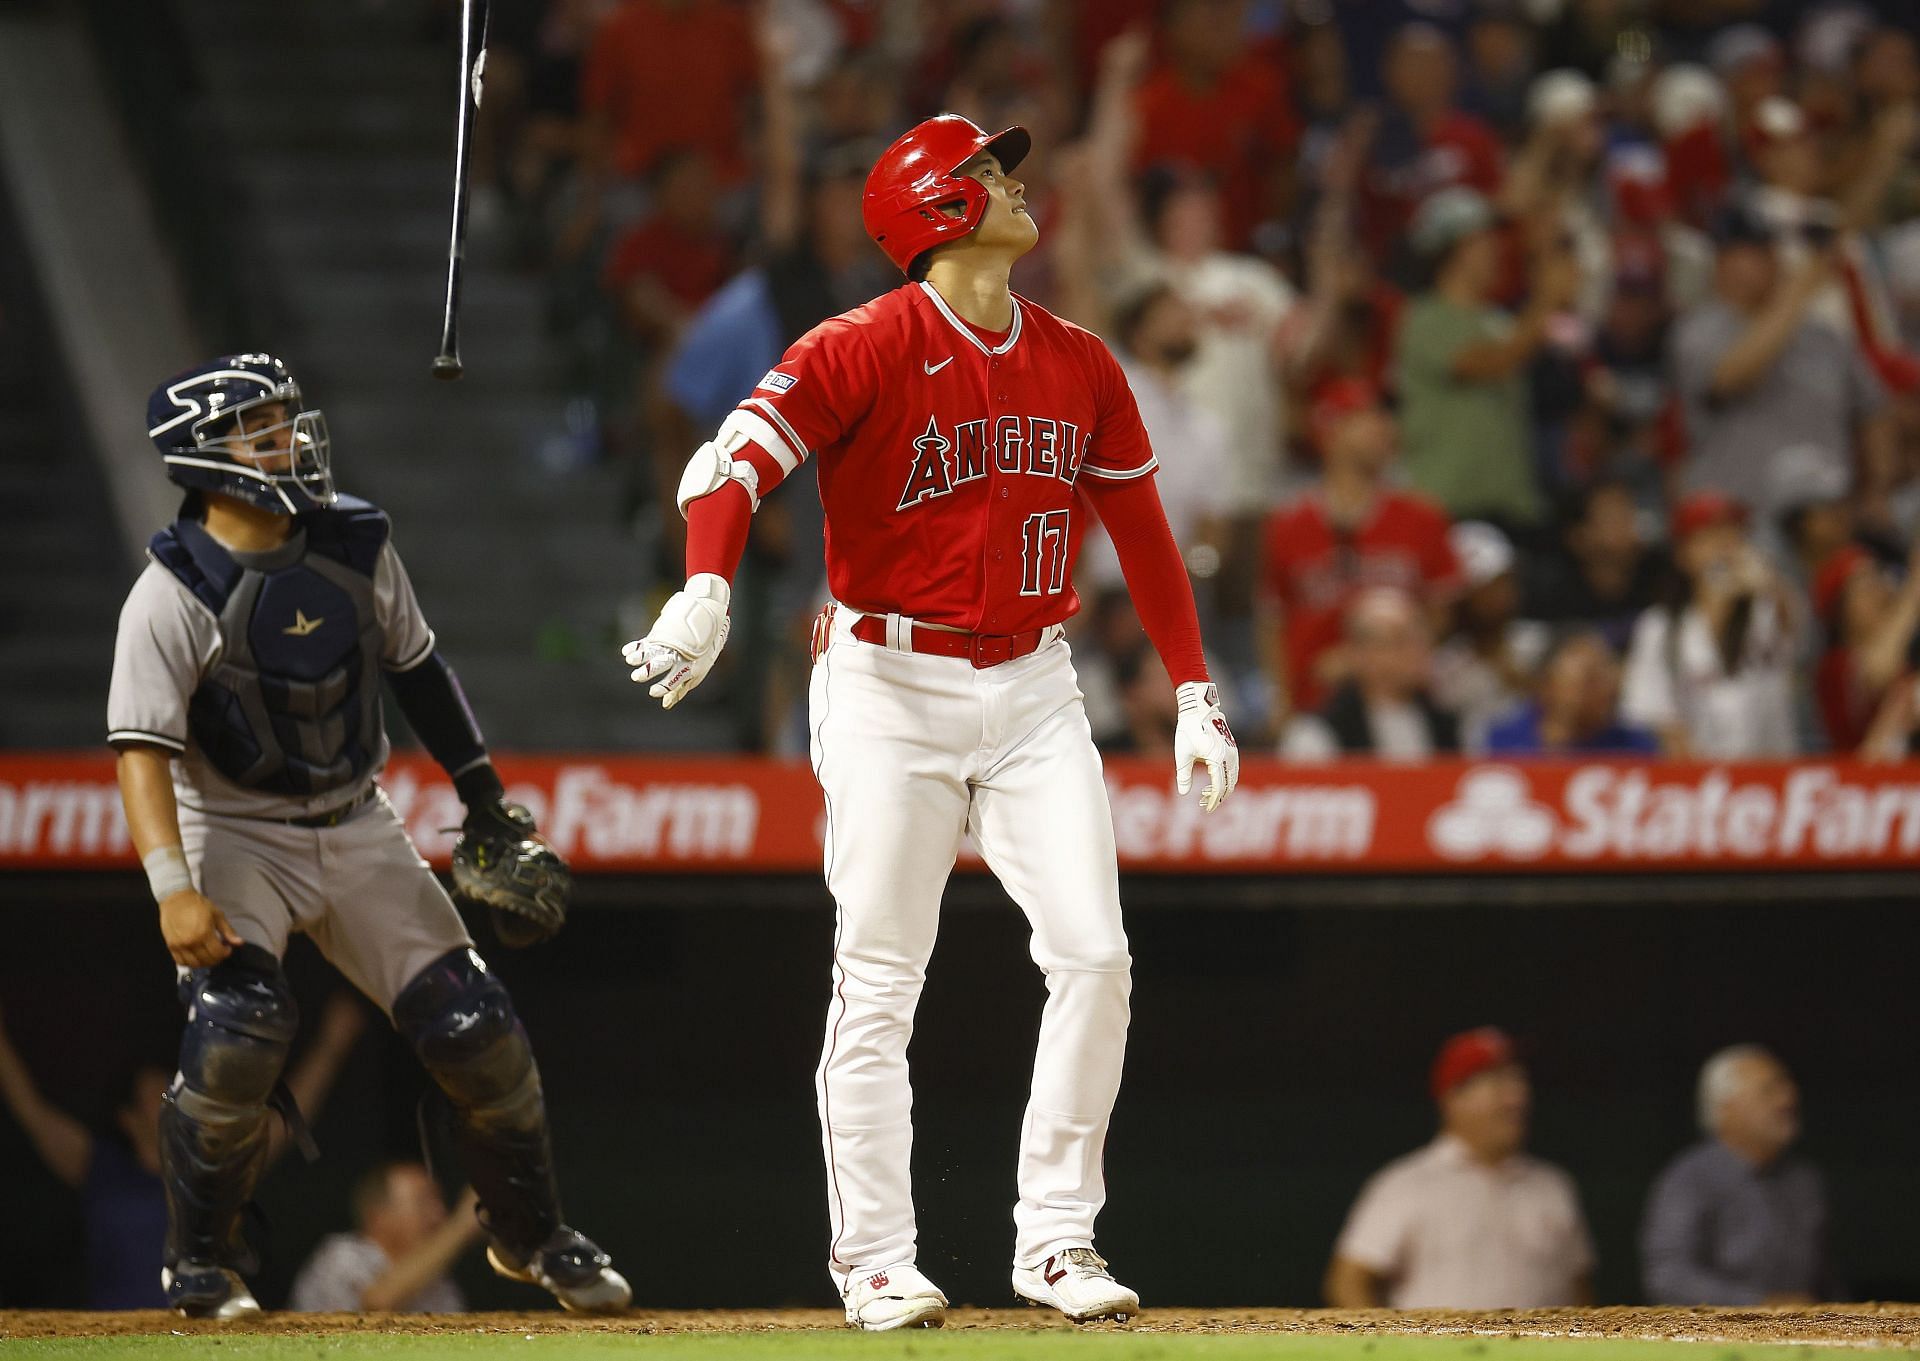 Shohei Ohtani of the Los Angeles Angels after hitting a home run against the New York Yankees at Angel Stadium of Anaheim